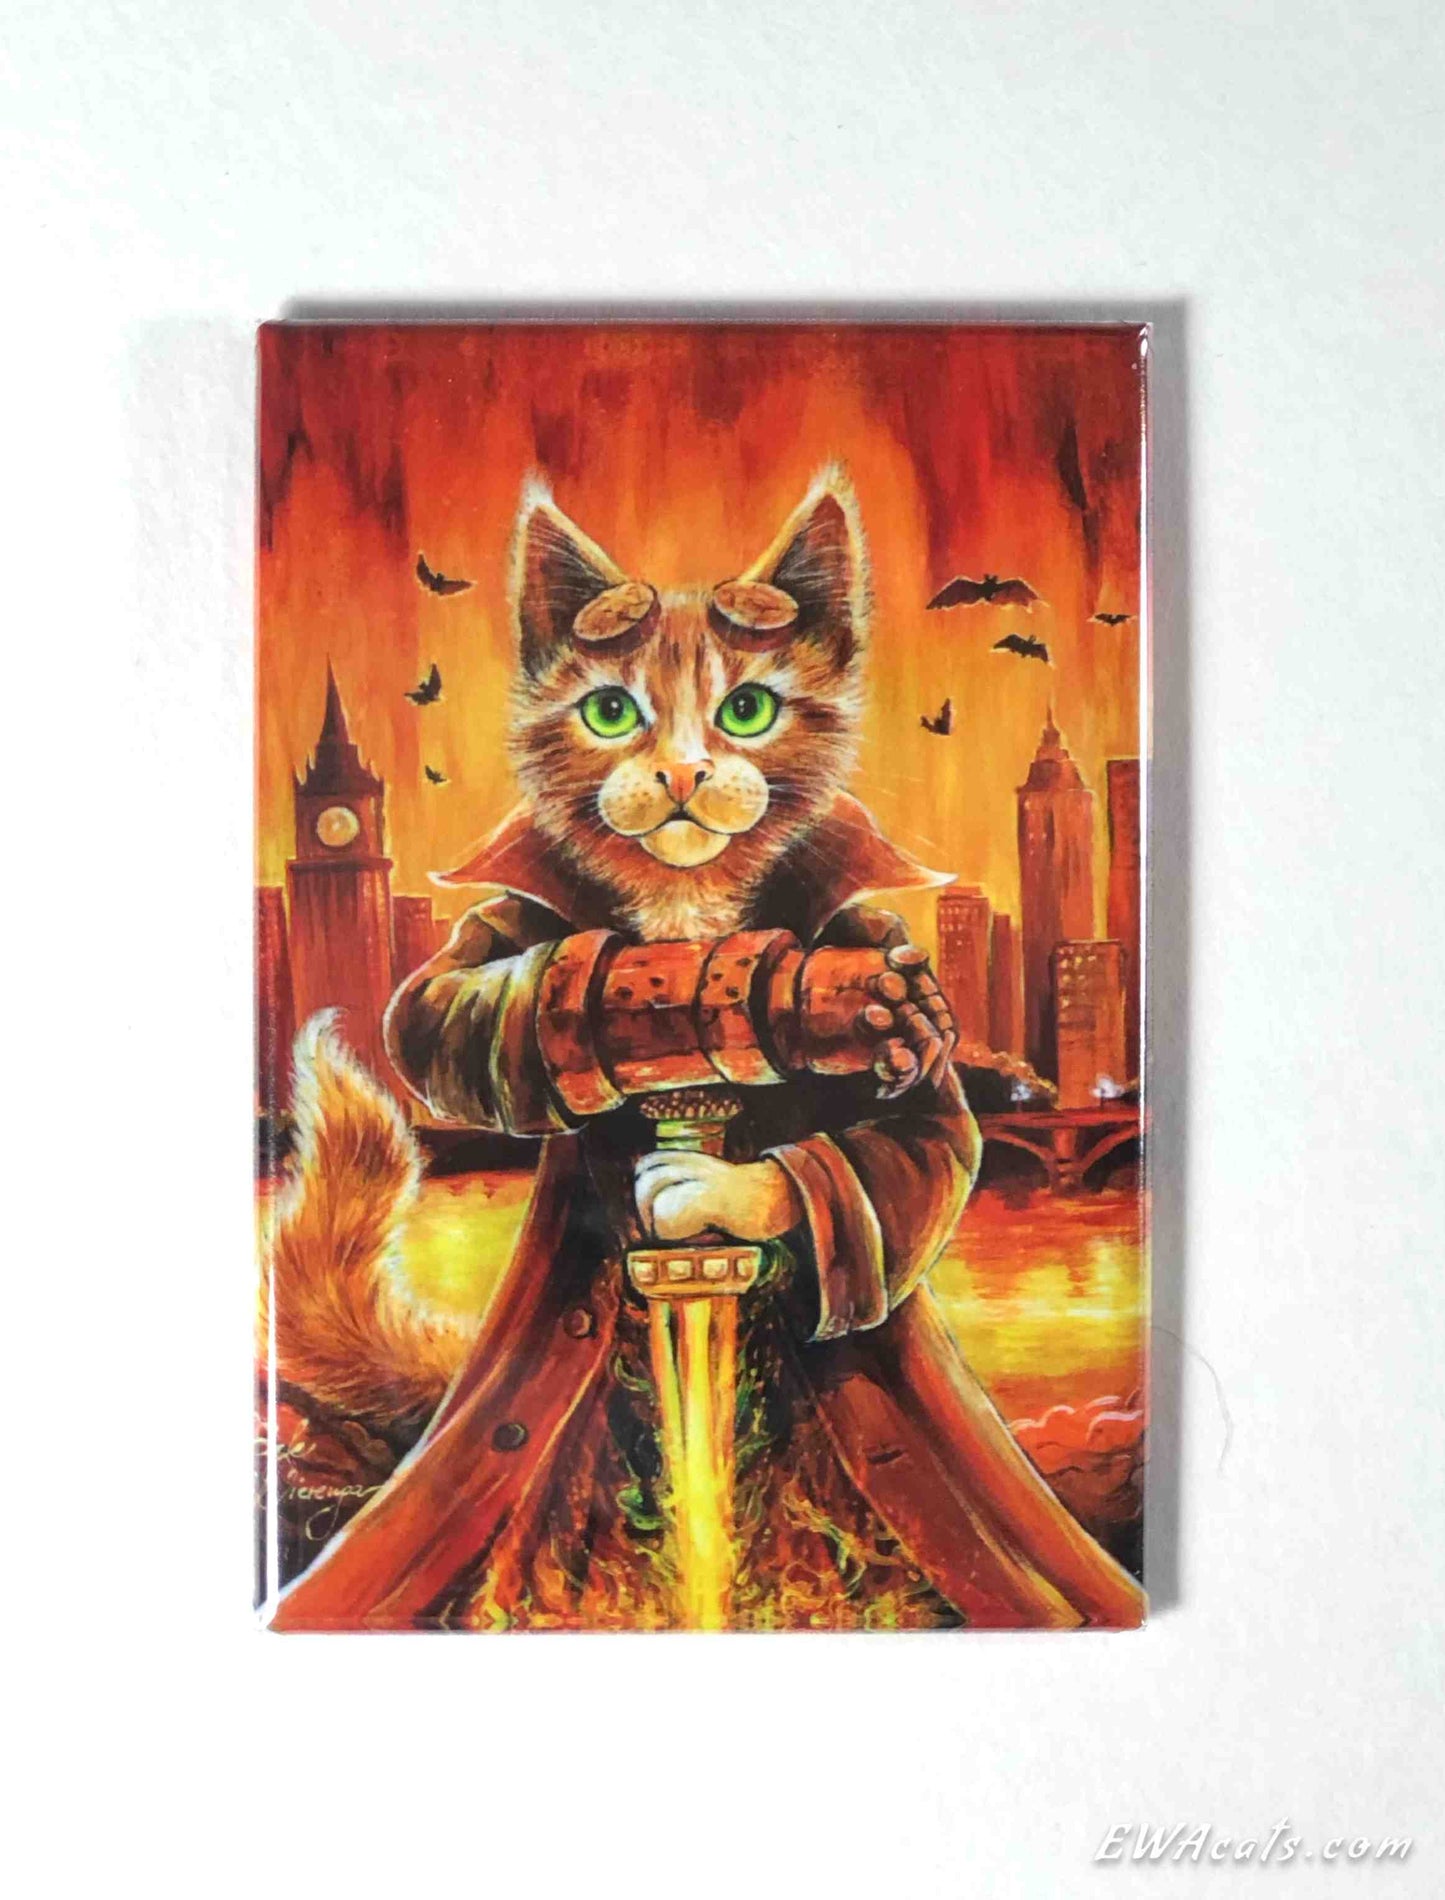 MAGNET 2"x 3" Rectangle "Hellboy Kitty"